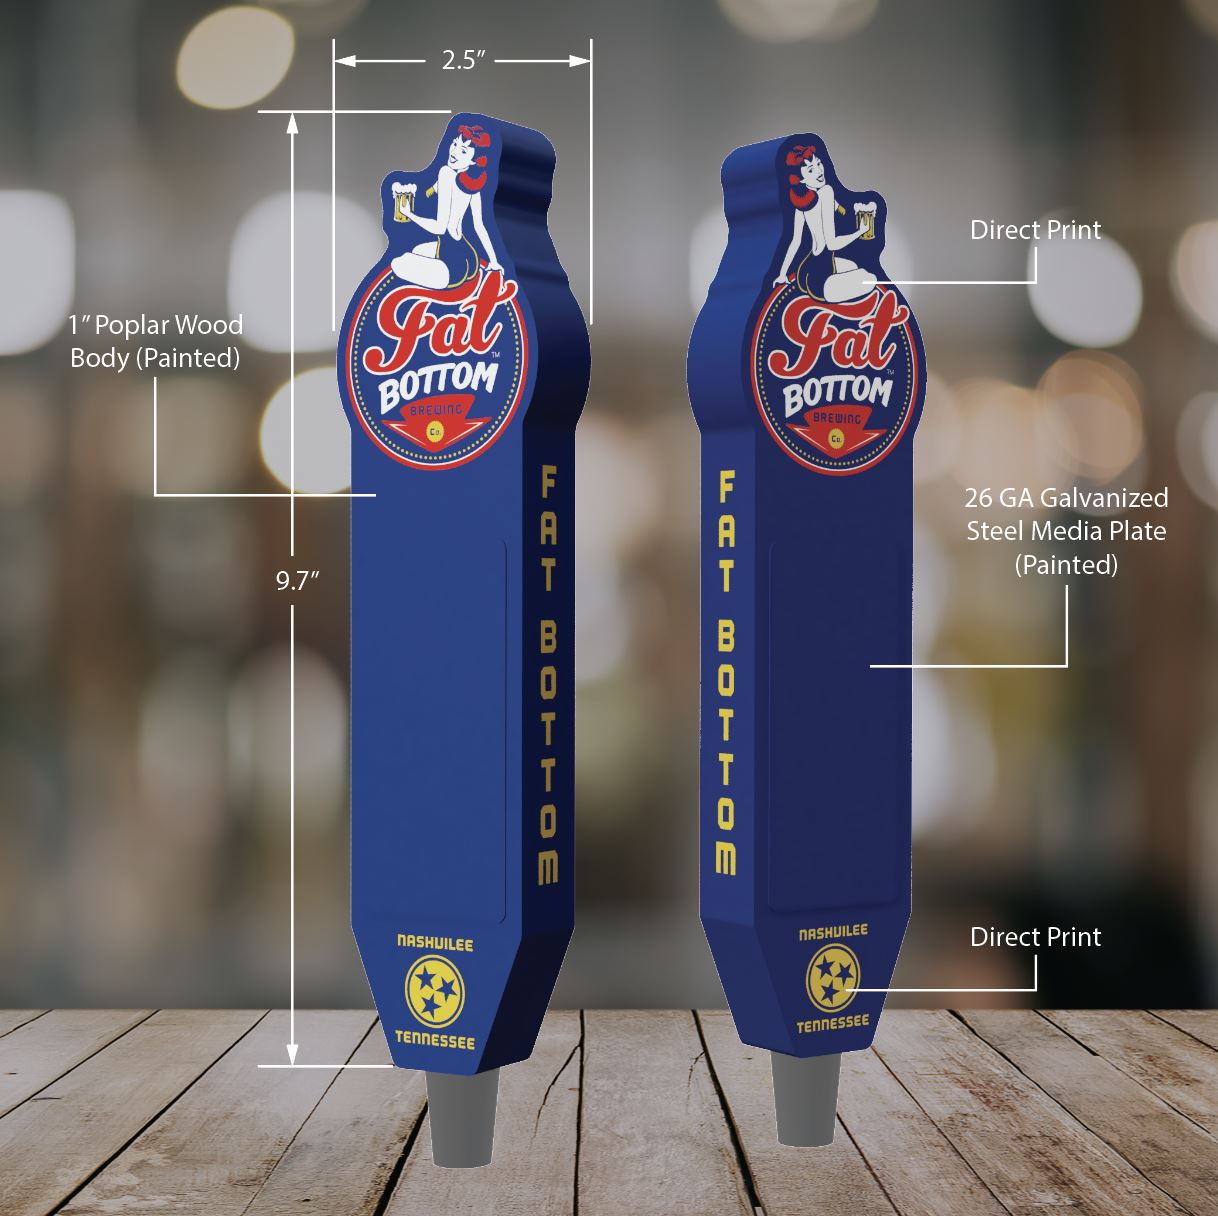 Custom Tap Handles:  Boost Your Brand and Brewery’s Presence in the Market